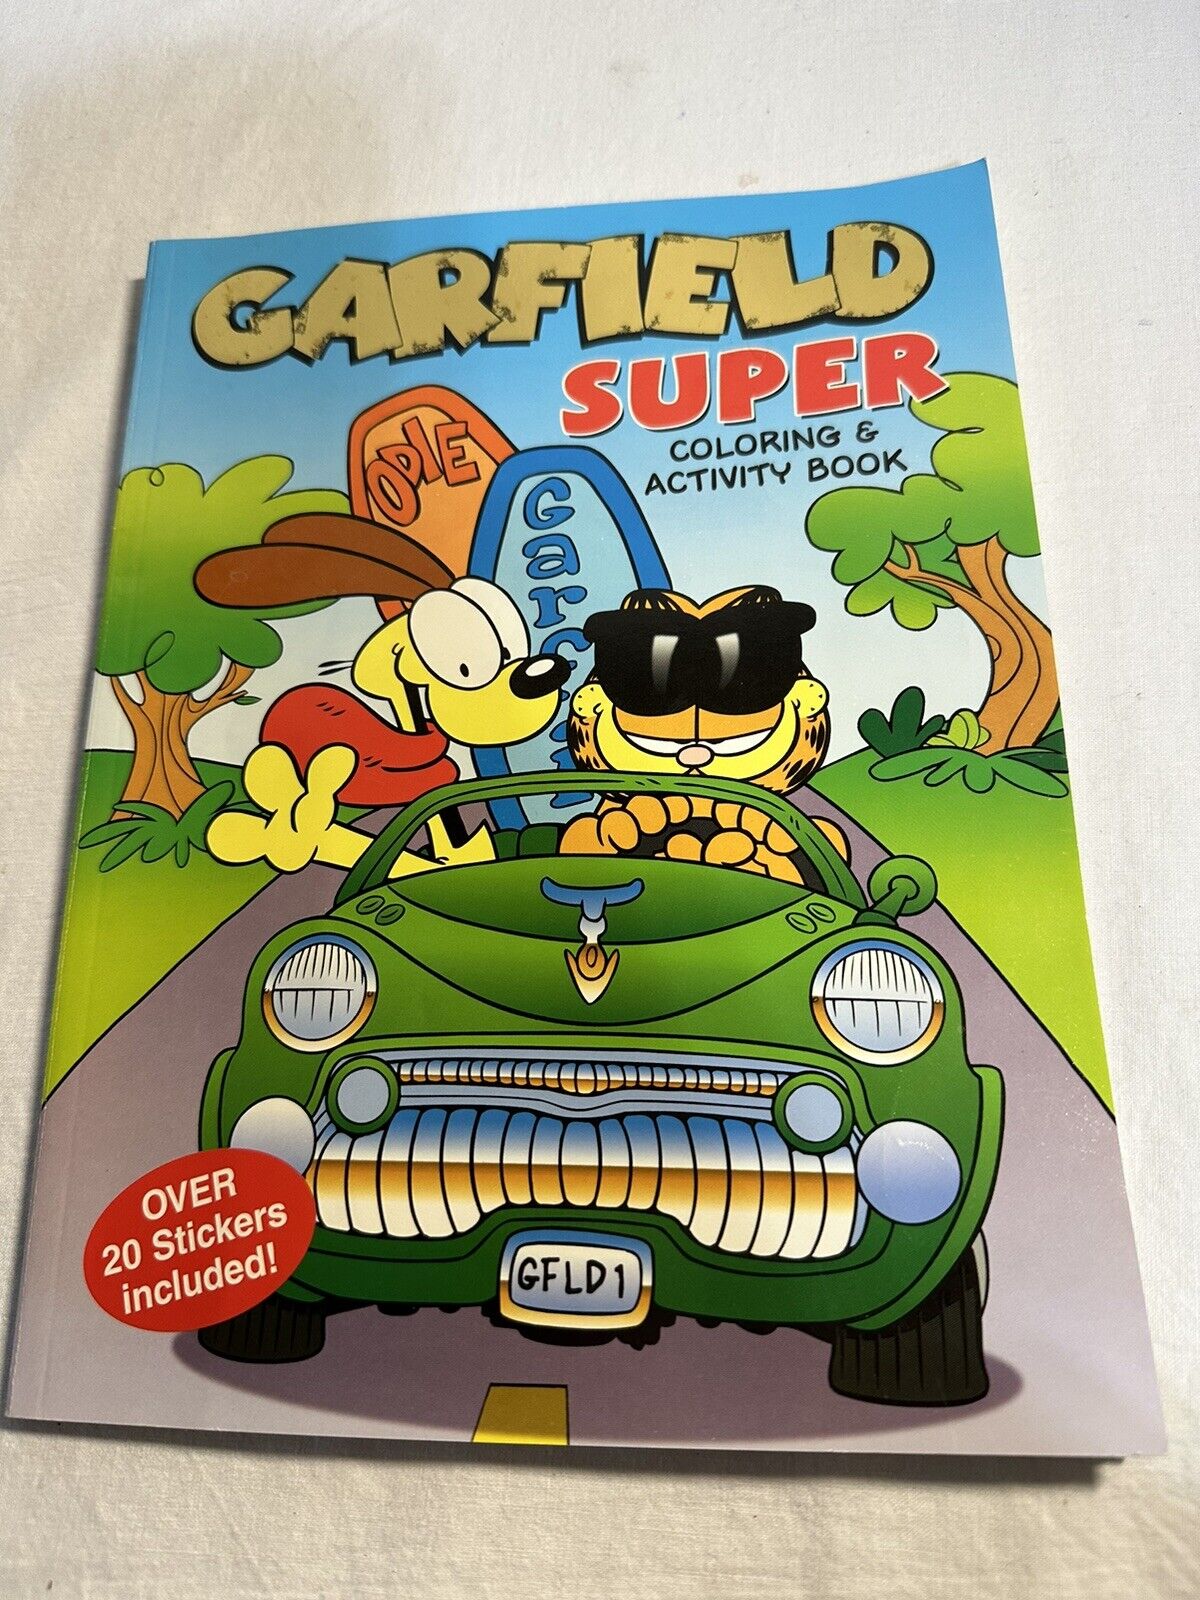 Vintage Garfield Best Friends Super Coloring & Activity Book With Stickers